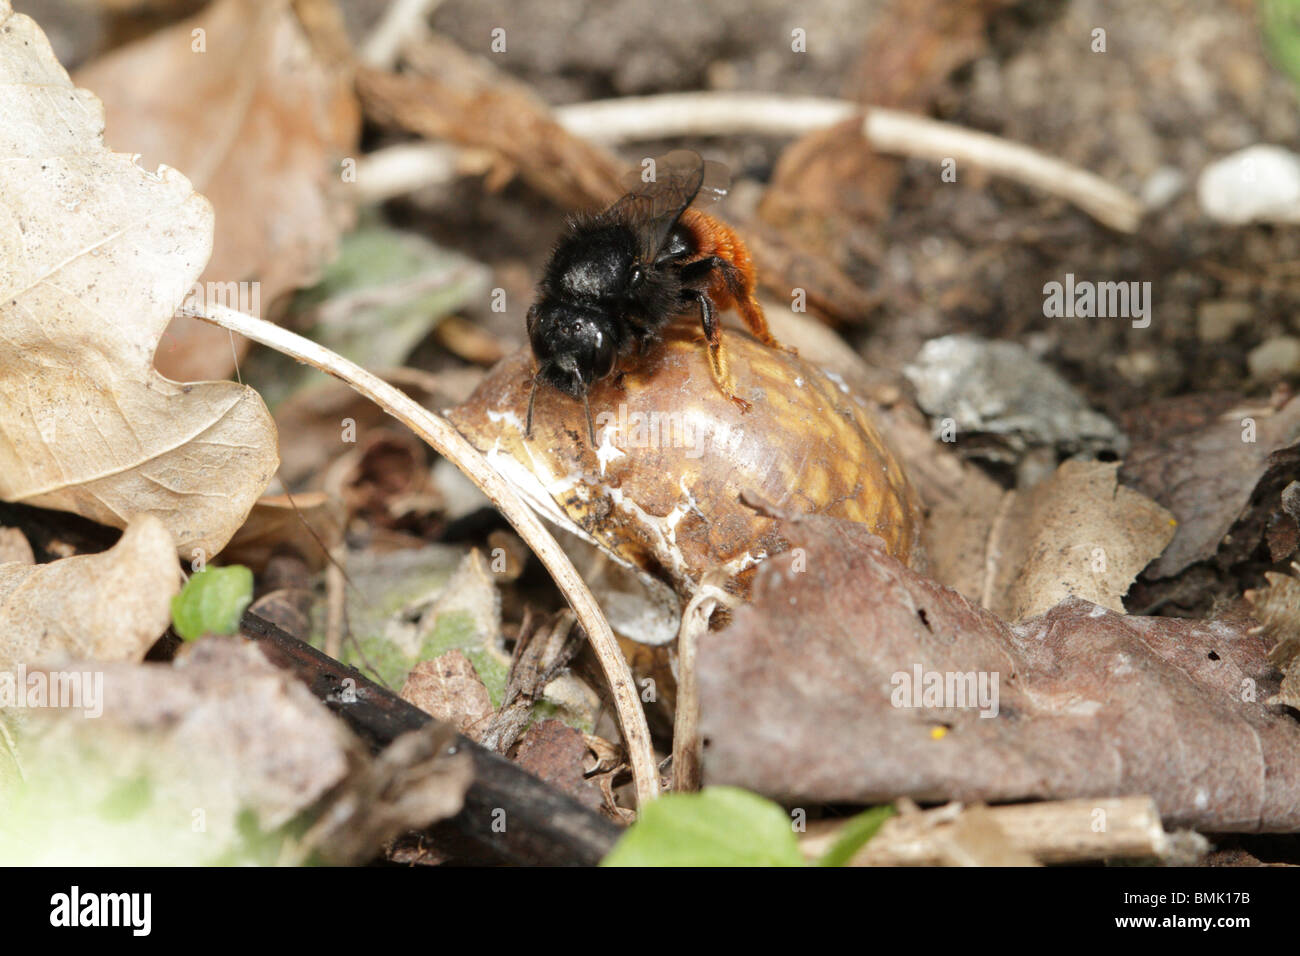 Osmia bicolor, a wild bee, building a nest in an old snail shell. Stock Photo